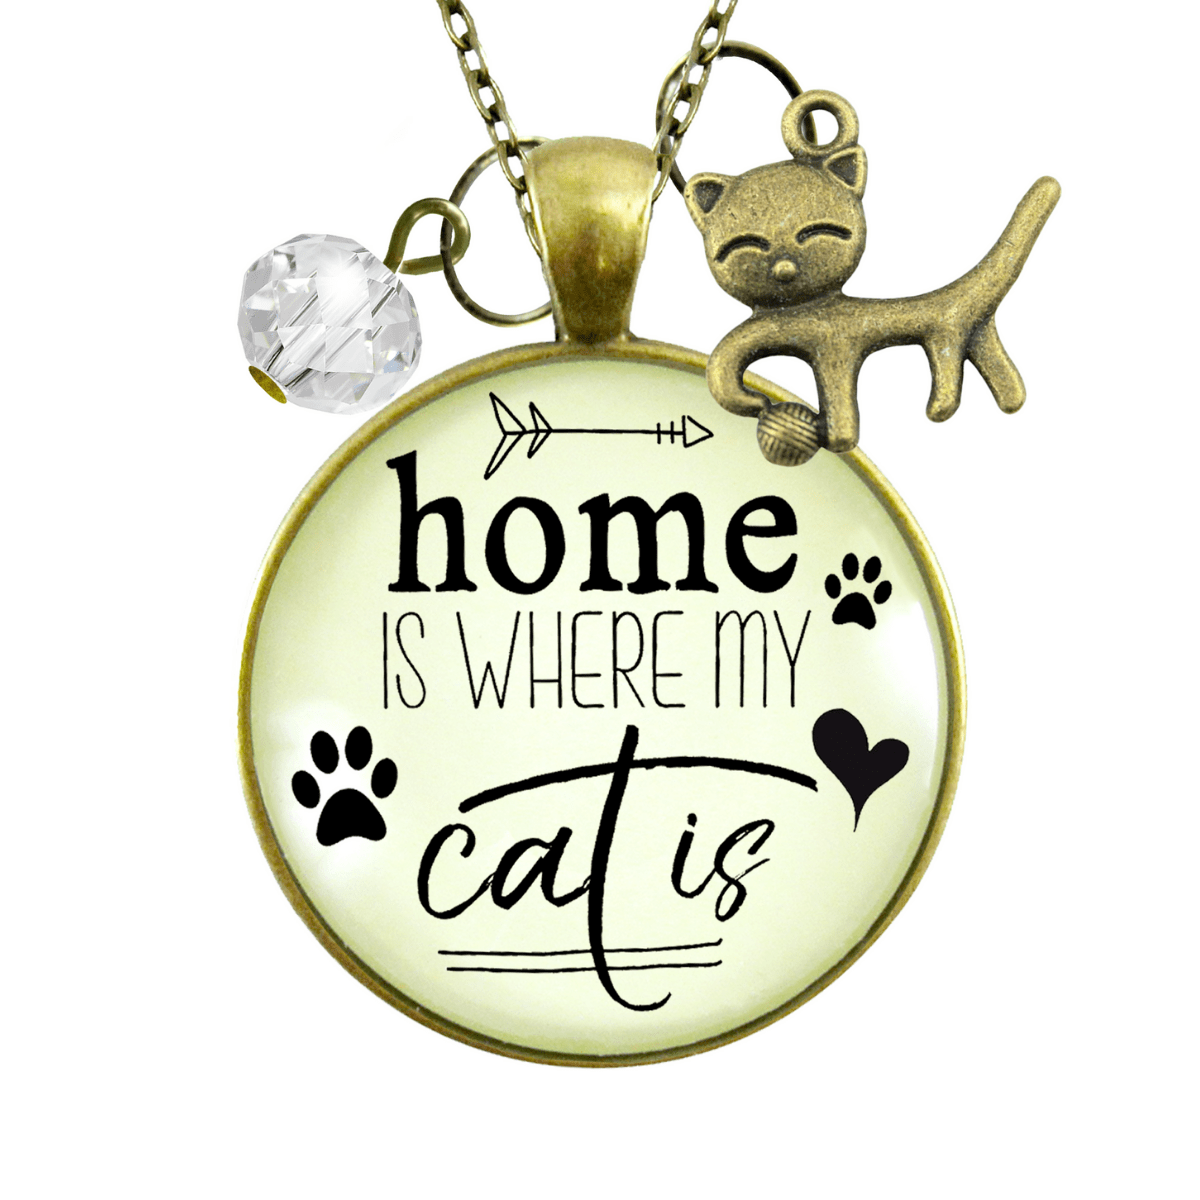 Gutsy Goodness Cat Necklace Home is Where My Cat is Kitty Saying Feline Gift Womens Jewelry - Gutsy Goodness Handmade Jewelry;Cat Necklace Home Is Where My Cat Is Kitty Saying Feline Gift Womens Jewelry - Gutsy Goodness Handmade Jewelry Gifts